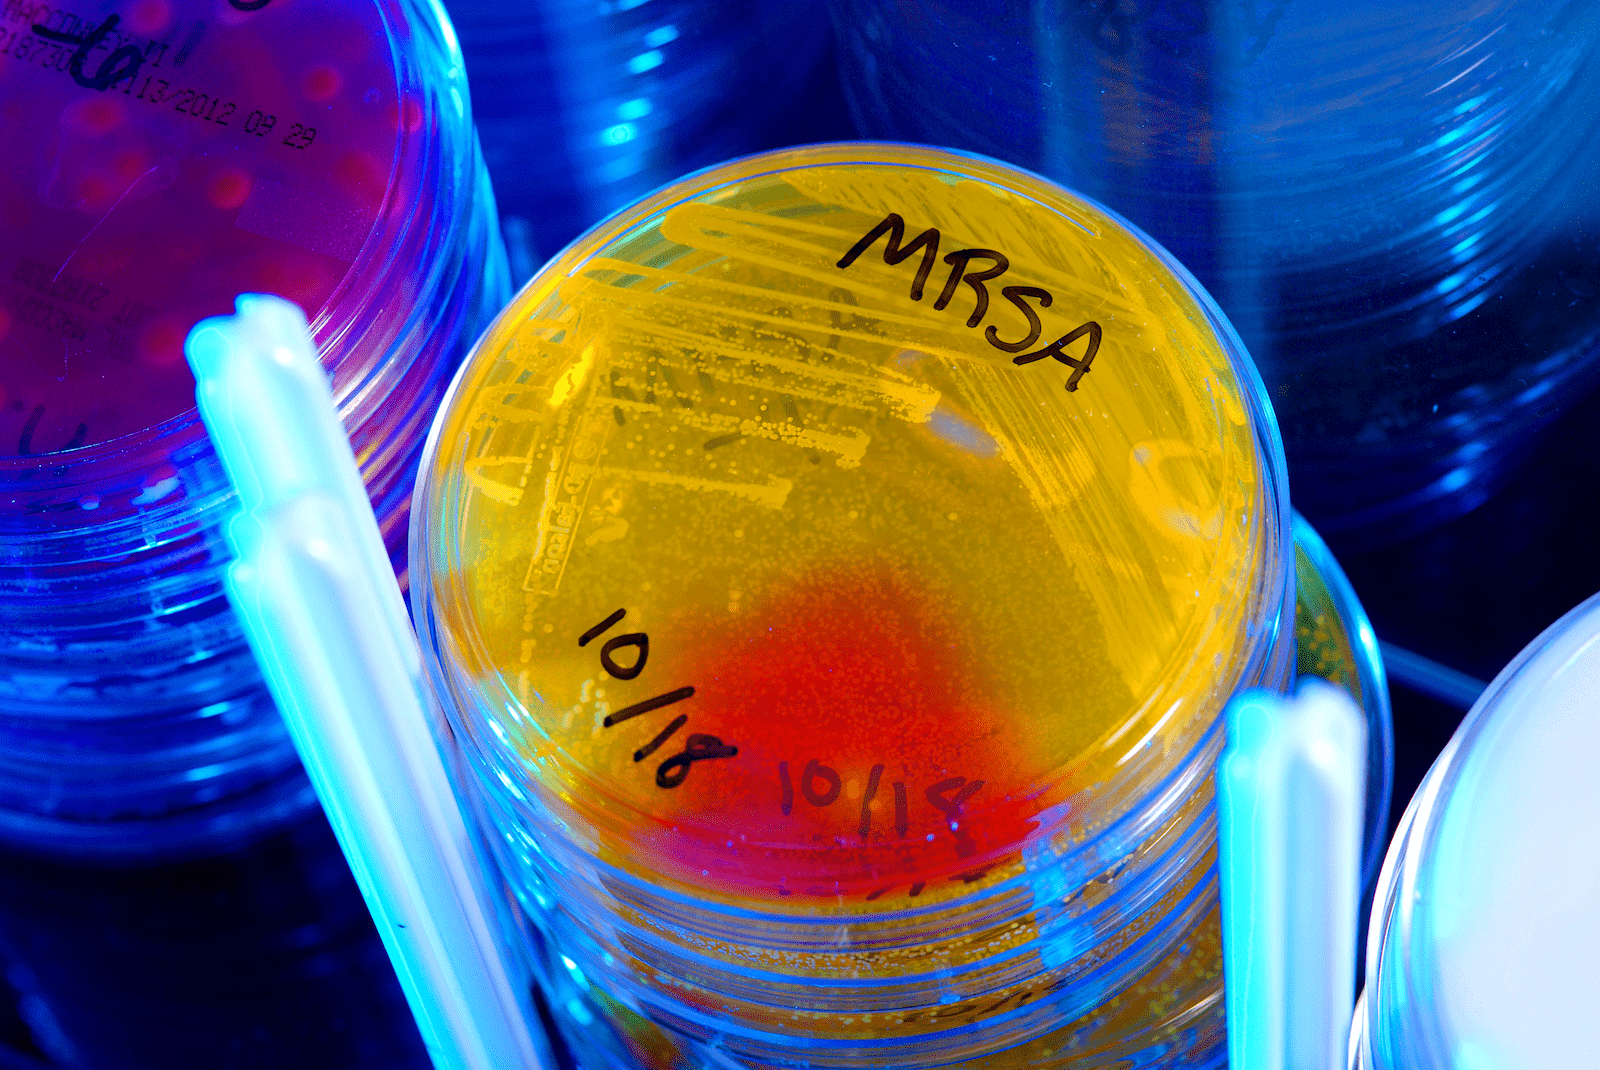 various petri dishes in stacks under blue light. in the center of the image is a stack of yellow glowing plates. the top one reads "mrsa 10/18"